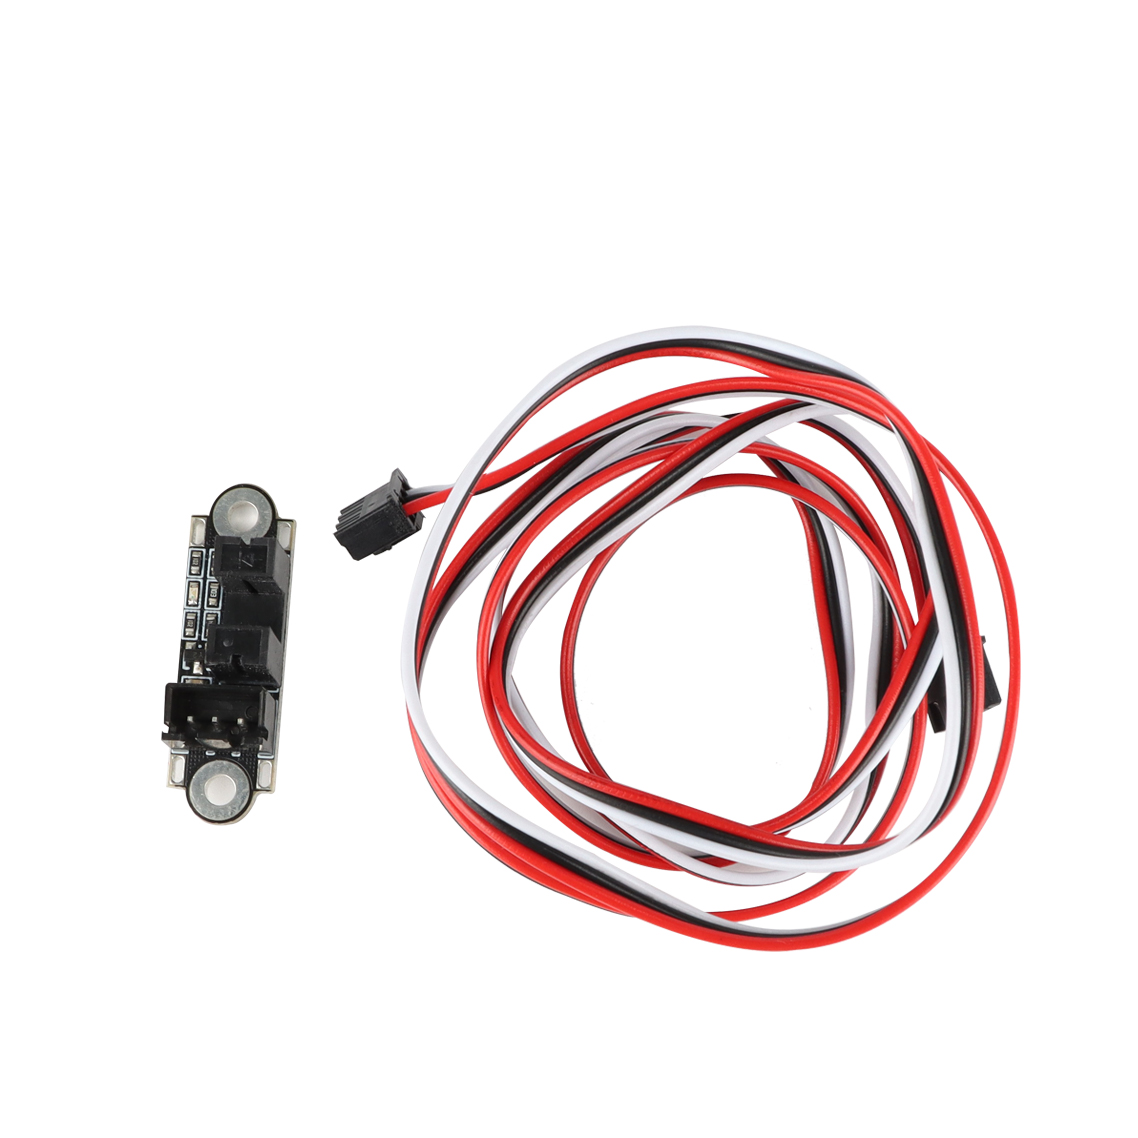 Endstop Switch Limit Switch Module With Cable for 3D Printer Cobees 